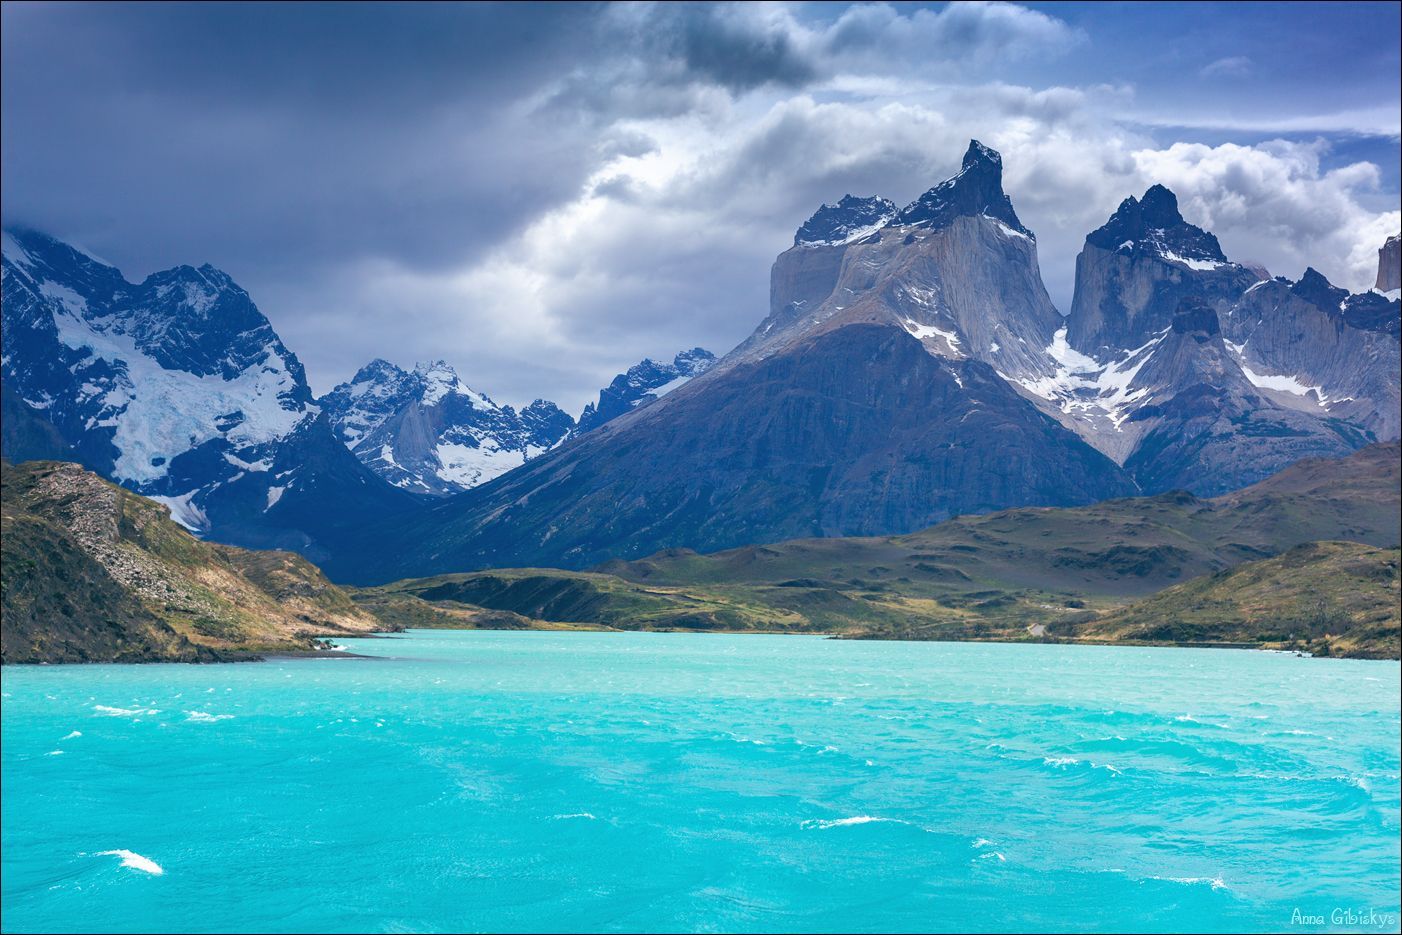 Patagonia: National Parks of Chile and Argentina